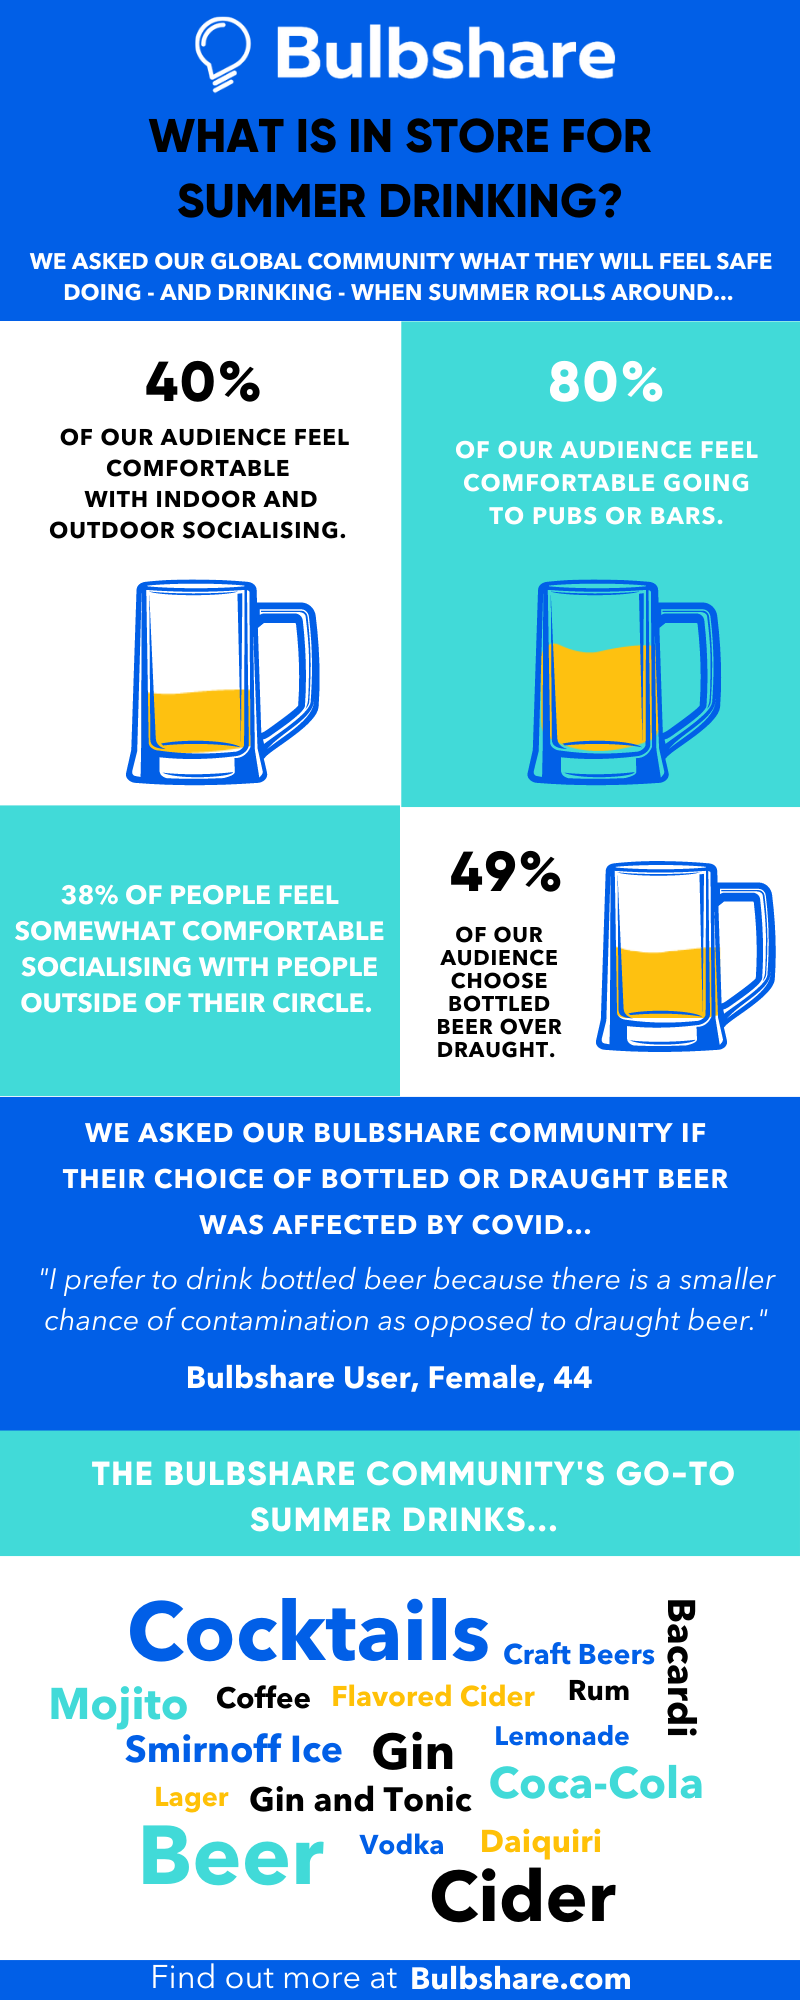 Summer drinking infographic with details about lockdown easing, based on responses from our market research community.